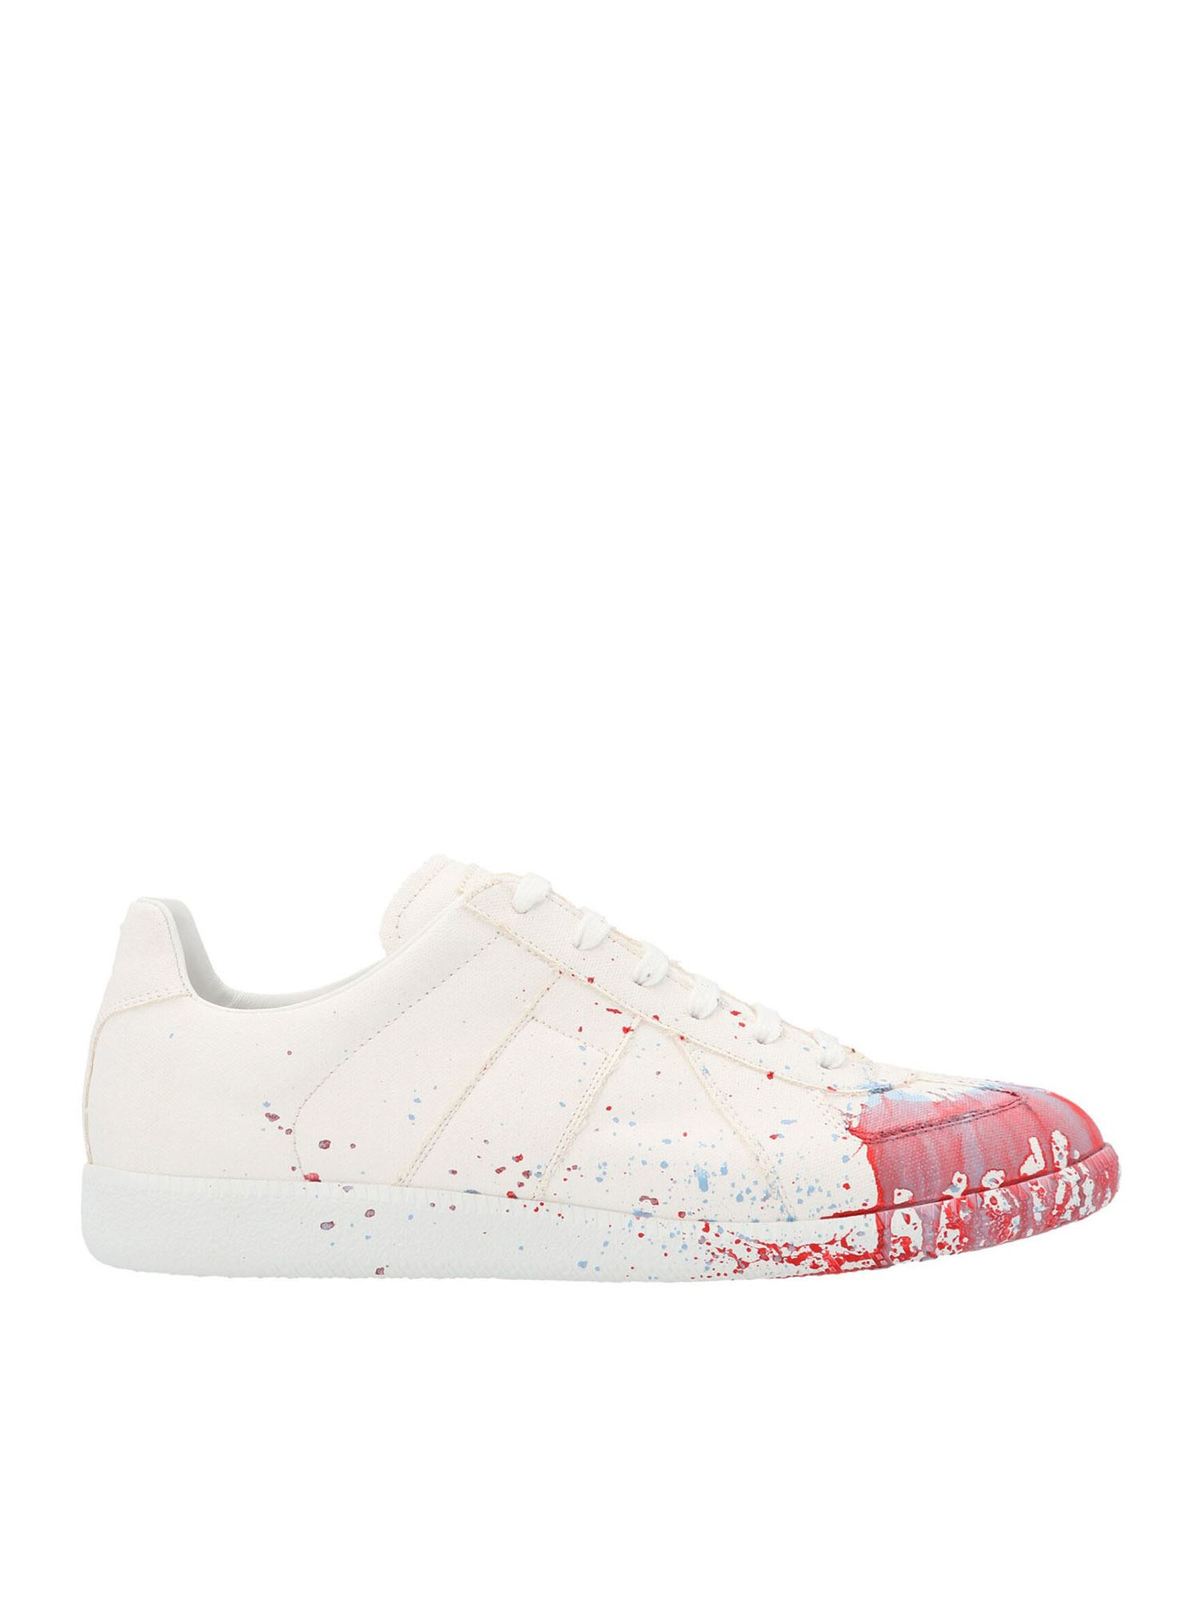 Maison Margiela Replica Paint Drop Sneakers In White And Red